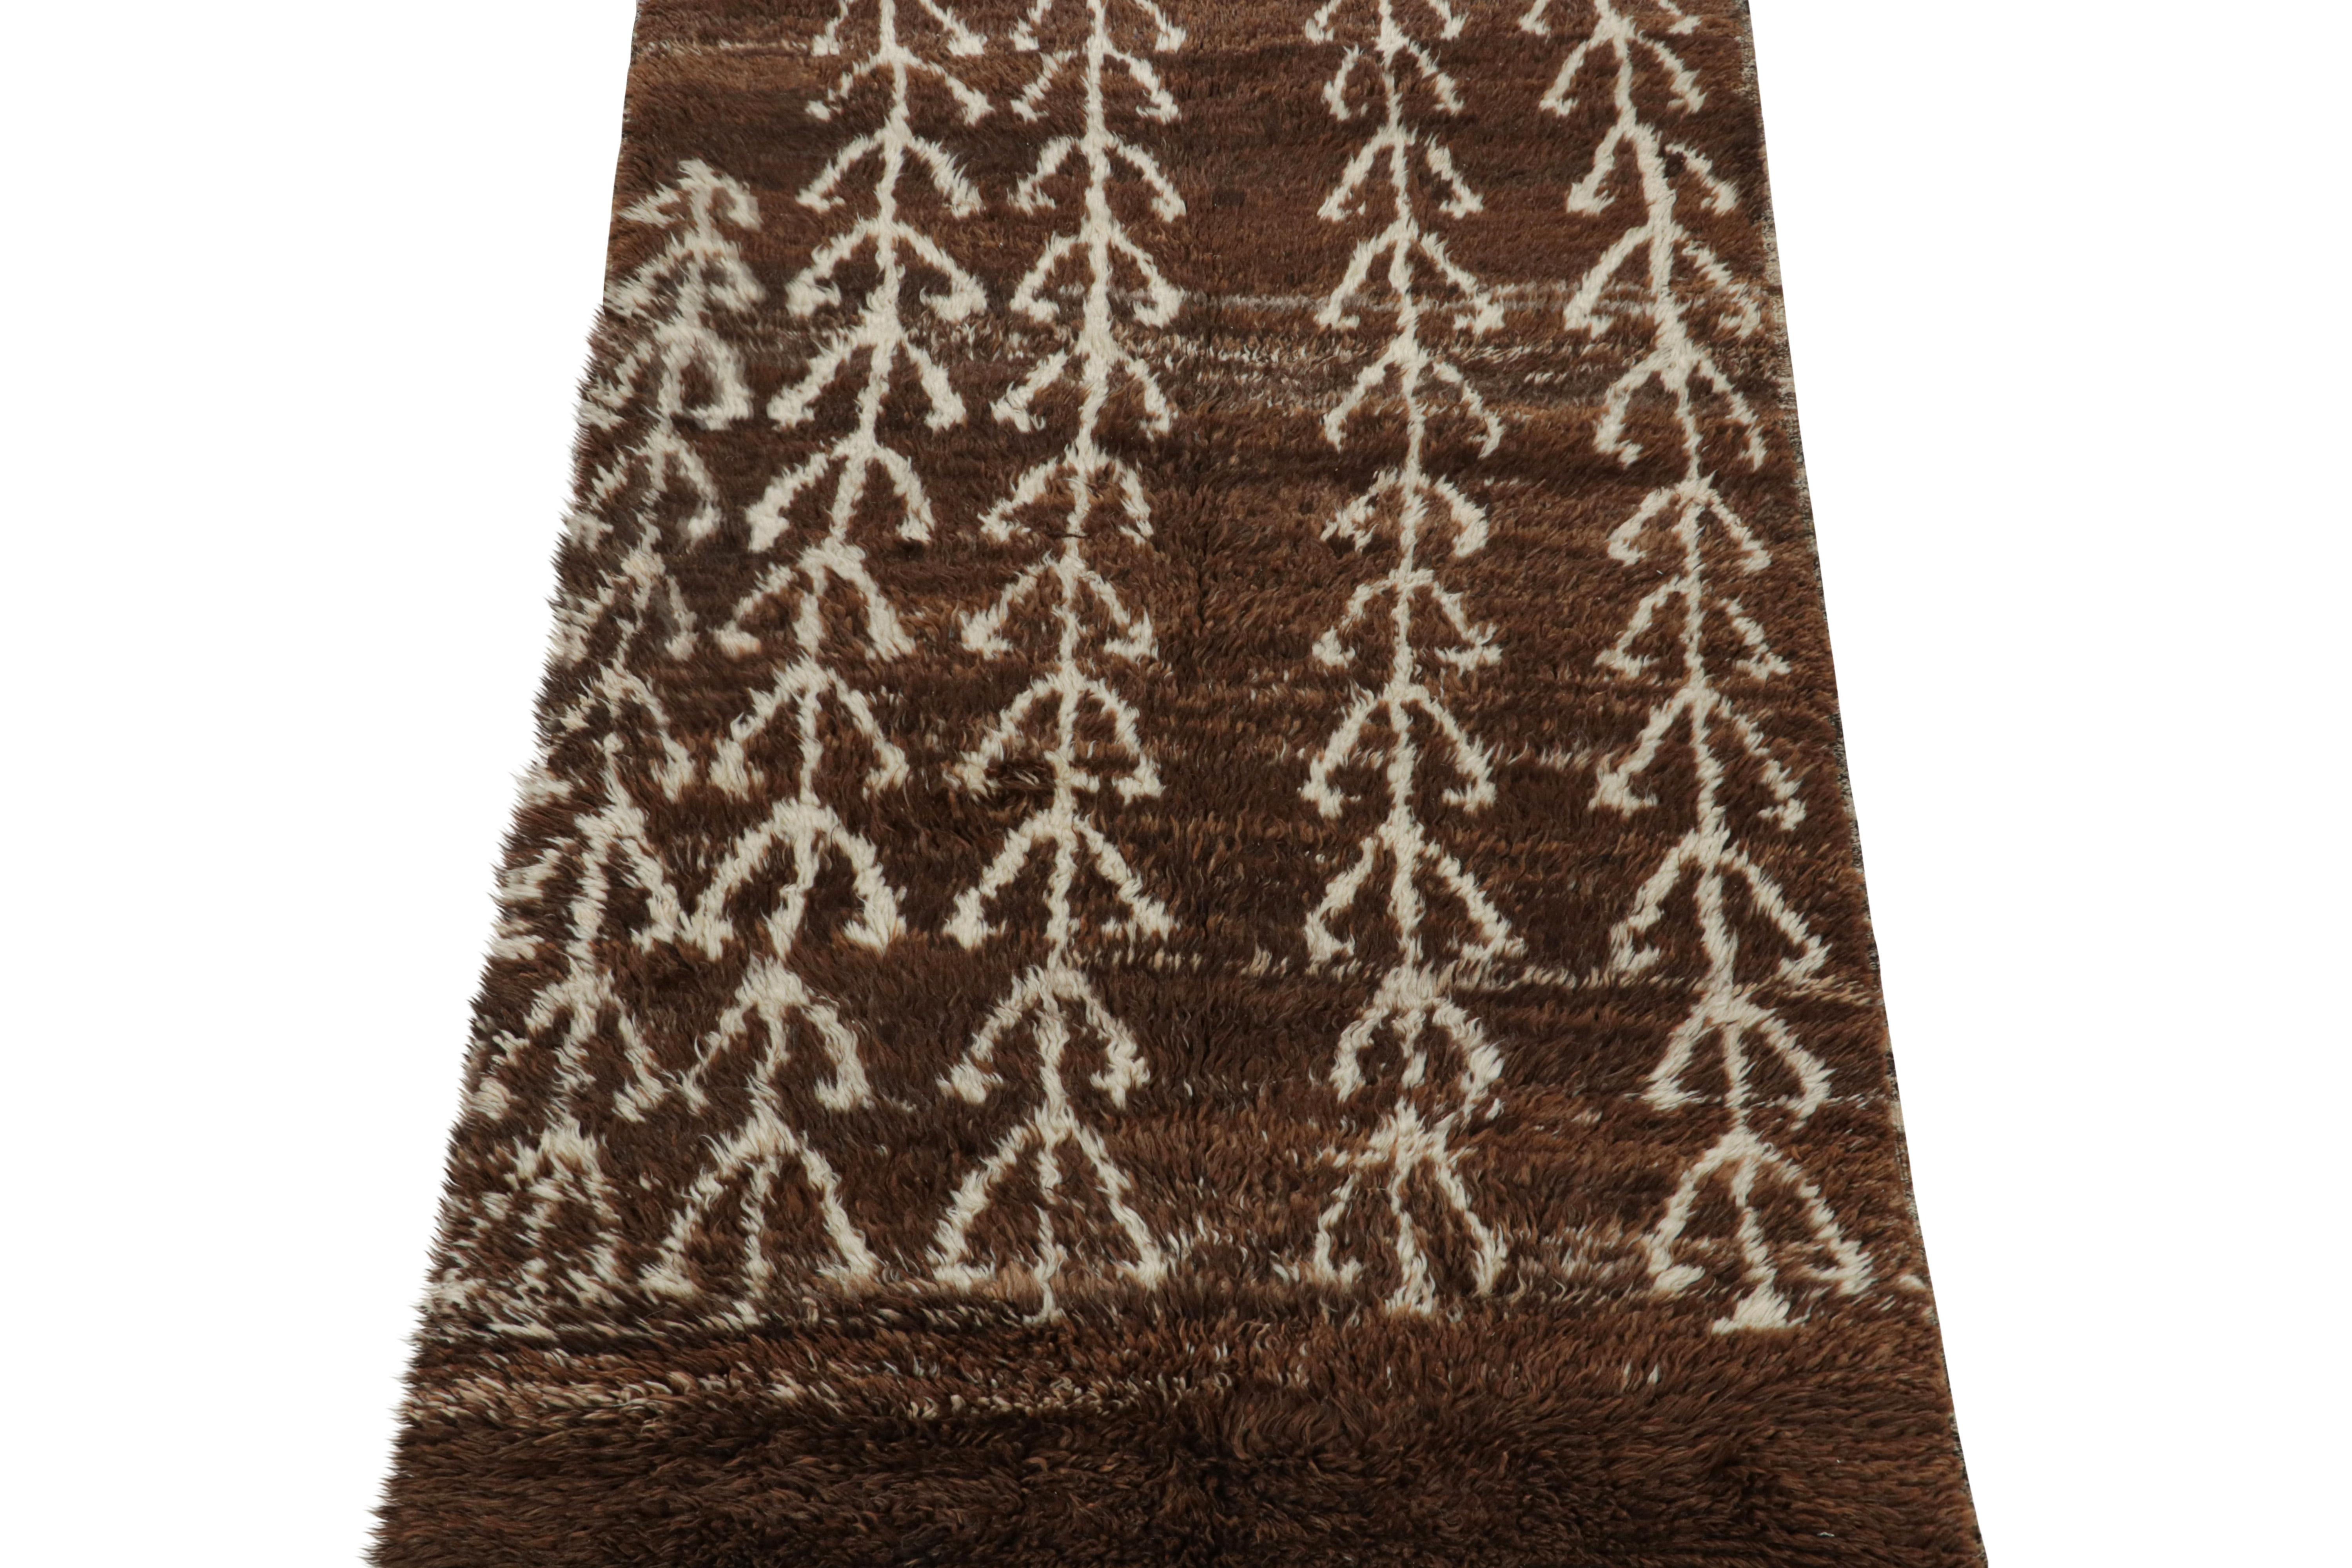 Tribal Vintage Moroccan rug in Brown with Beige Geometric Patterns, from Rug & Kilim For Sale